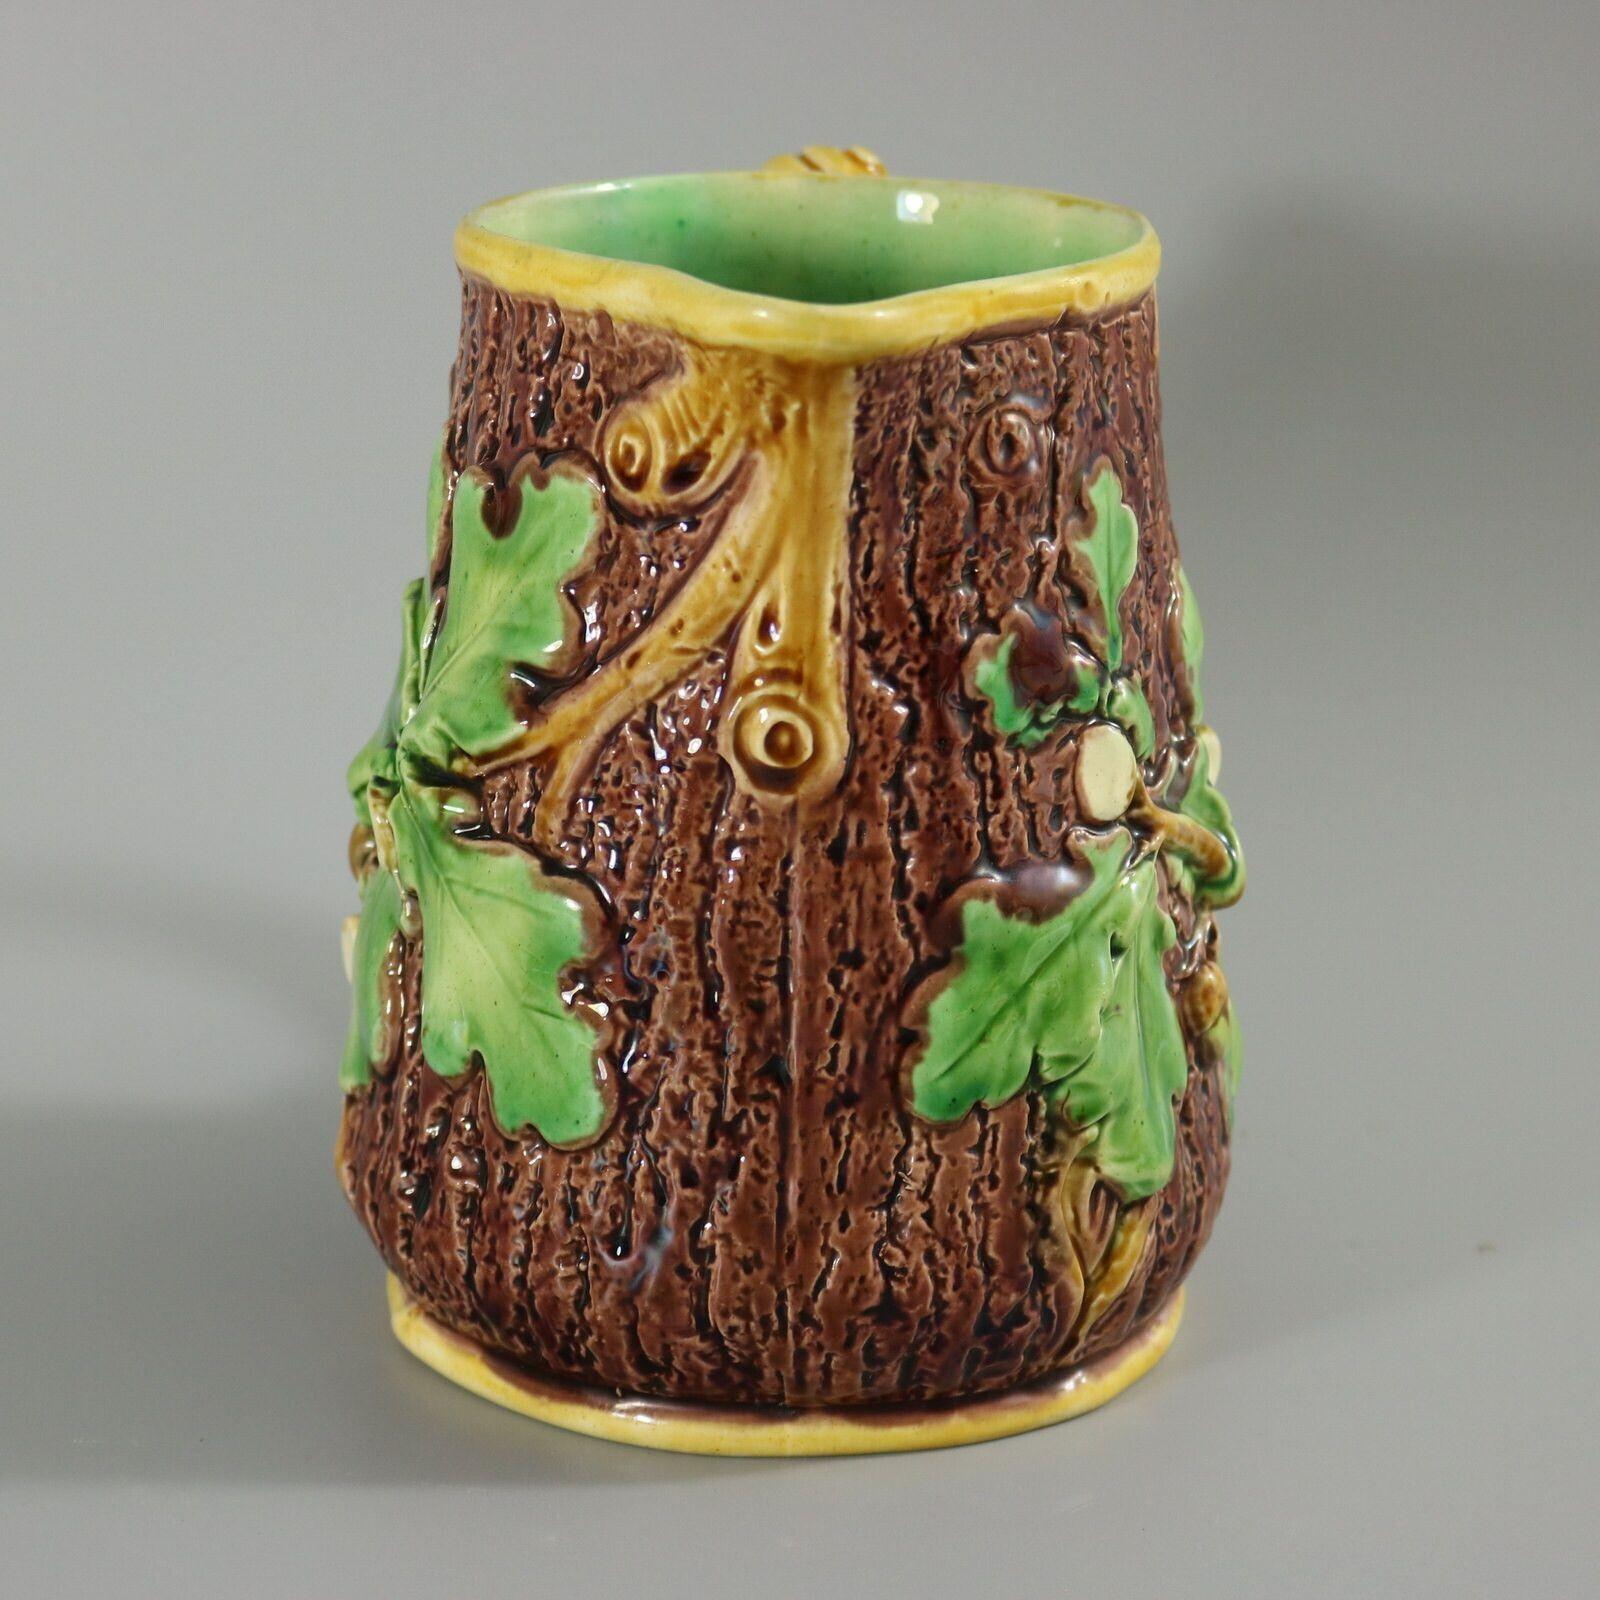 Mid-19th Century Minton Majolica Oak Jug / Pitcher with Snail Handle For Sale